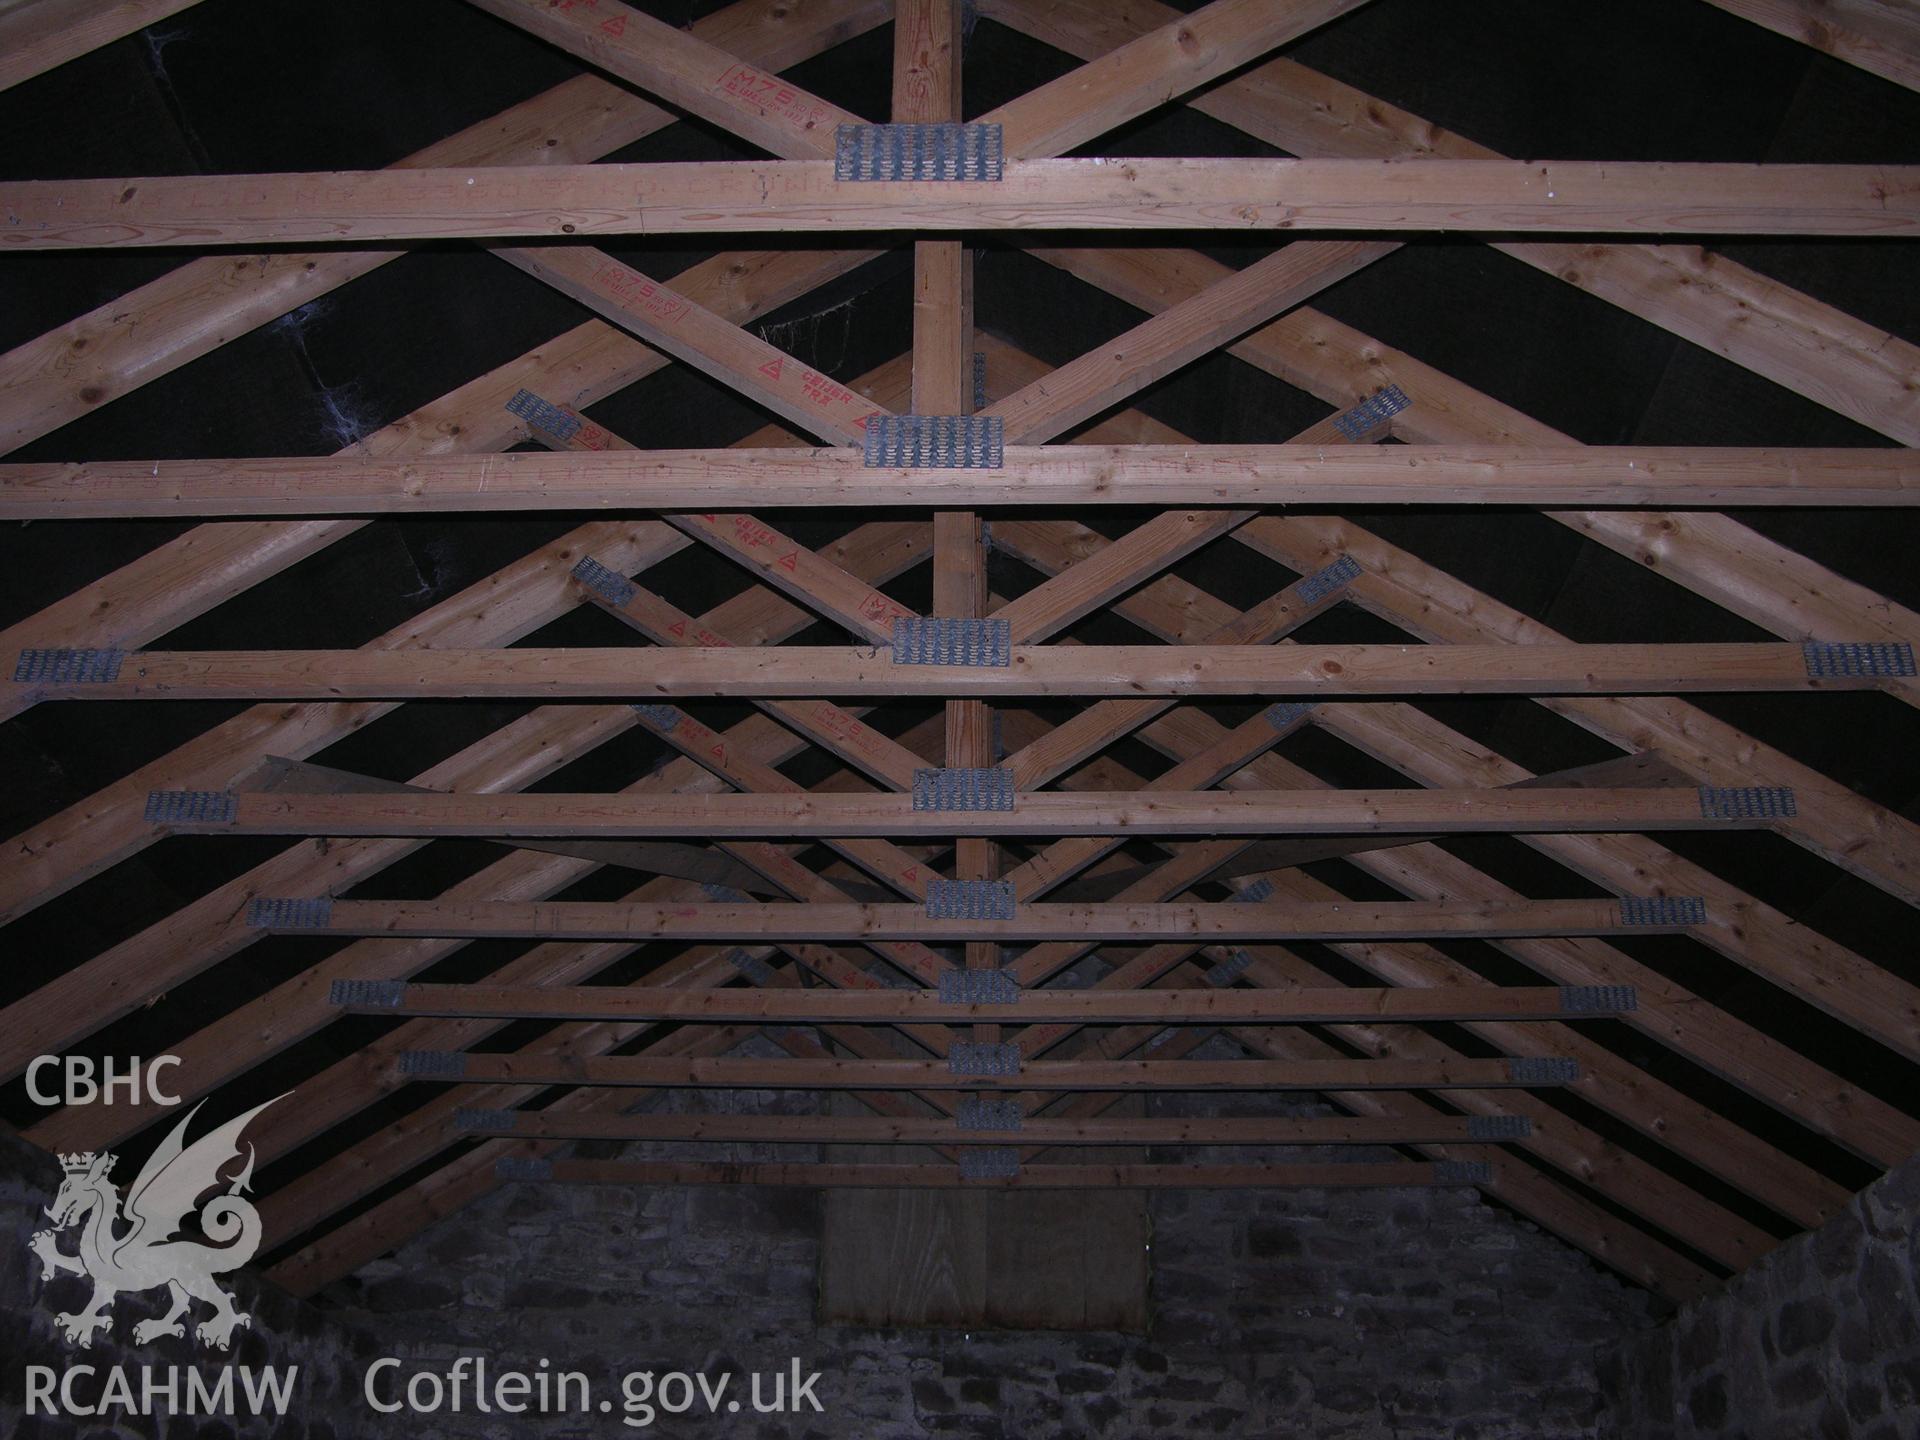 Digital photograph offering an interior view of the barns roof, from an Archaeological Building Recording of Hillside Barn, Llanvaches, Monmouthshire, which was conducted by Cambrian Archaeological Projects.